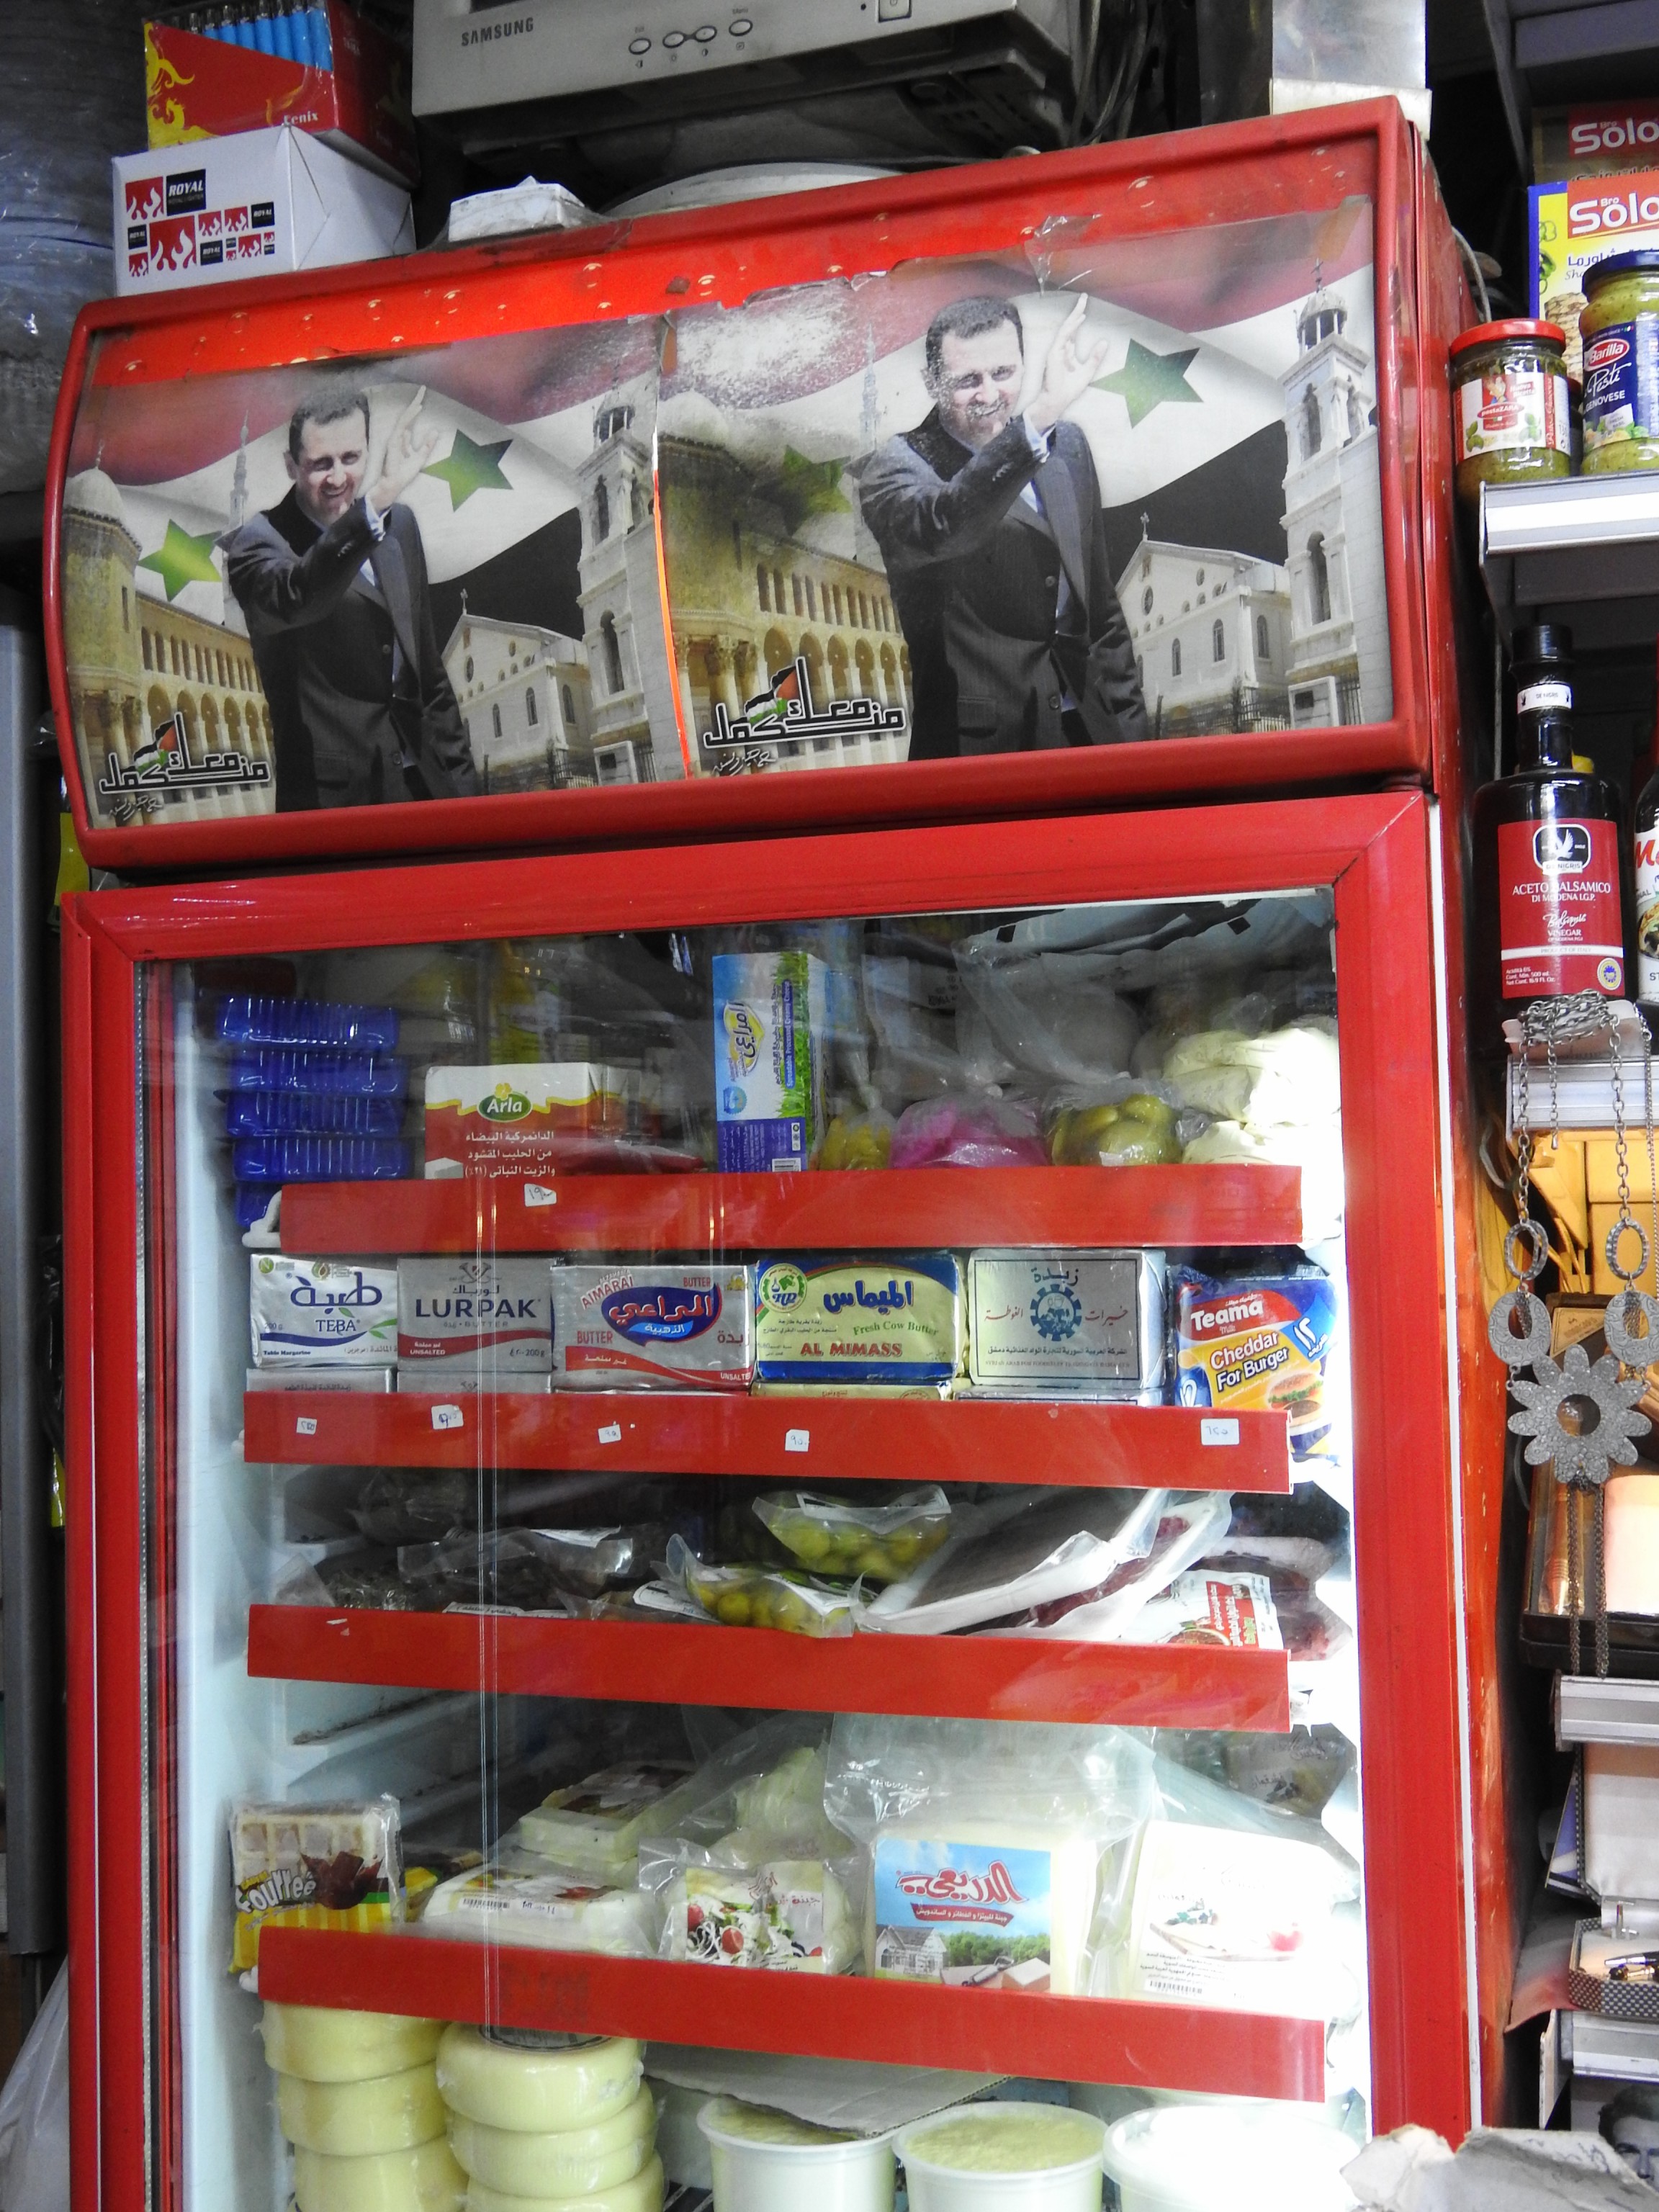 Stopping to buy water in an Old City shop, the owner's only issue with me taking a photograph of his fridge is that he wants to dust off the photos of President Assad a bit first, apologizing that they are old, from well-before the current crisis.